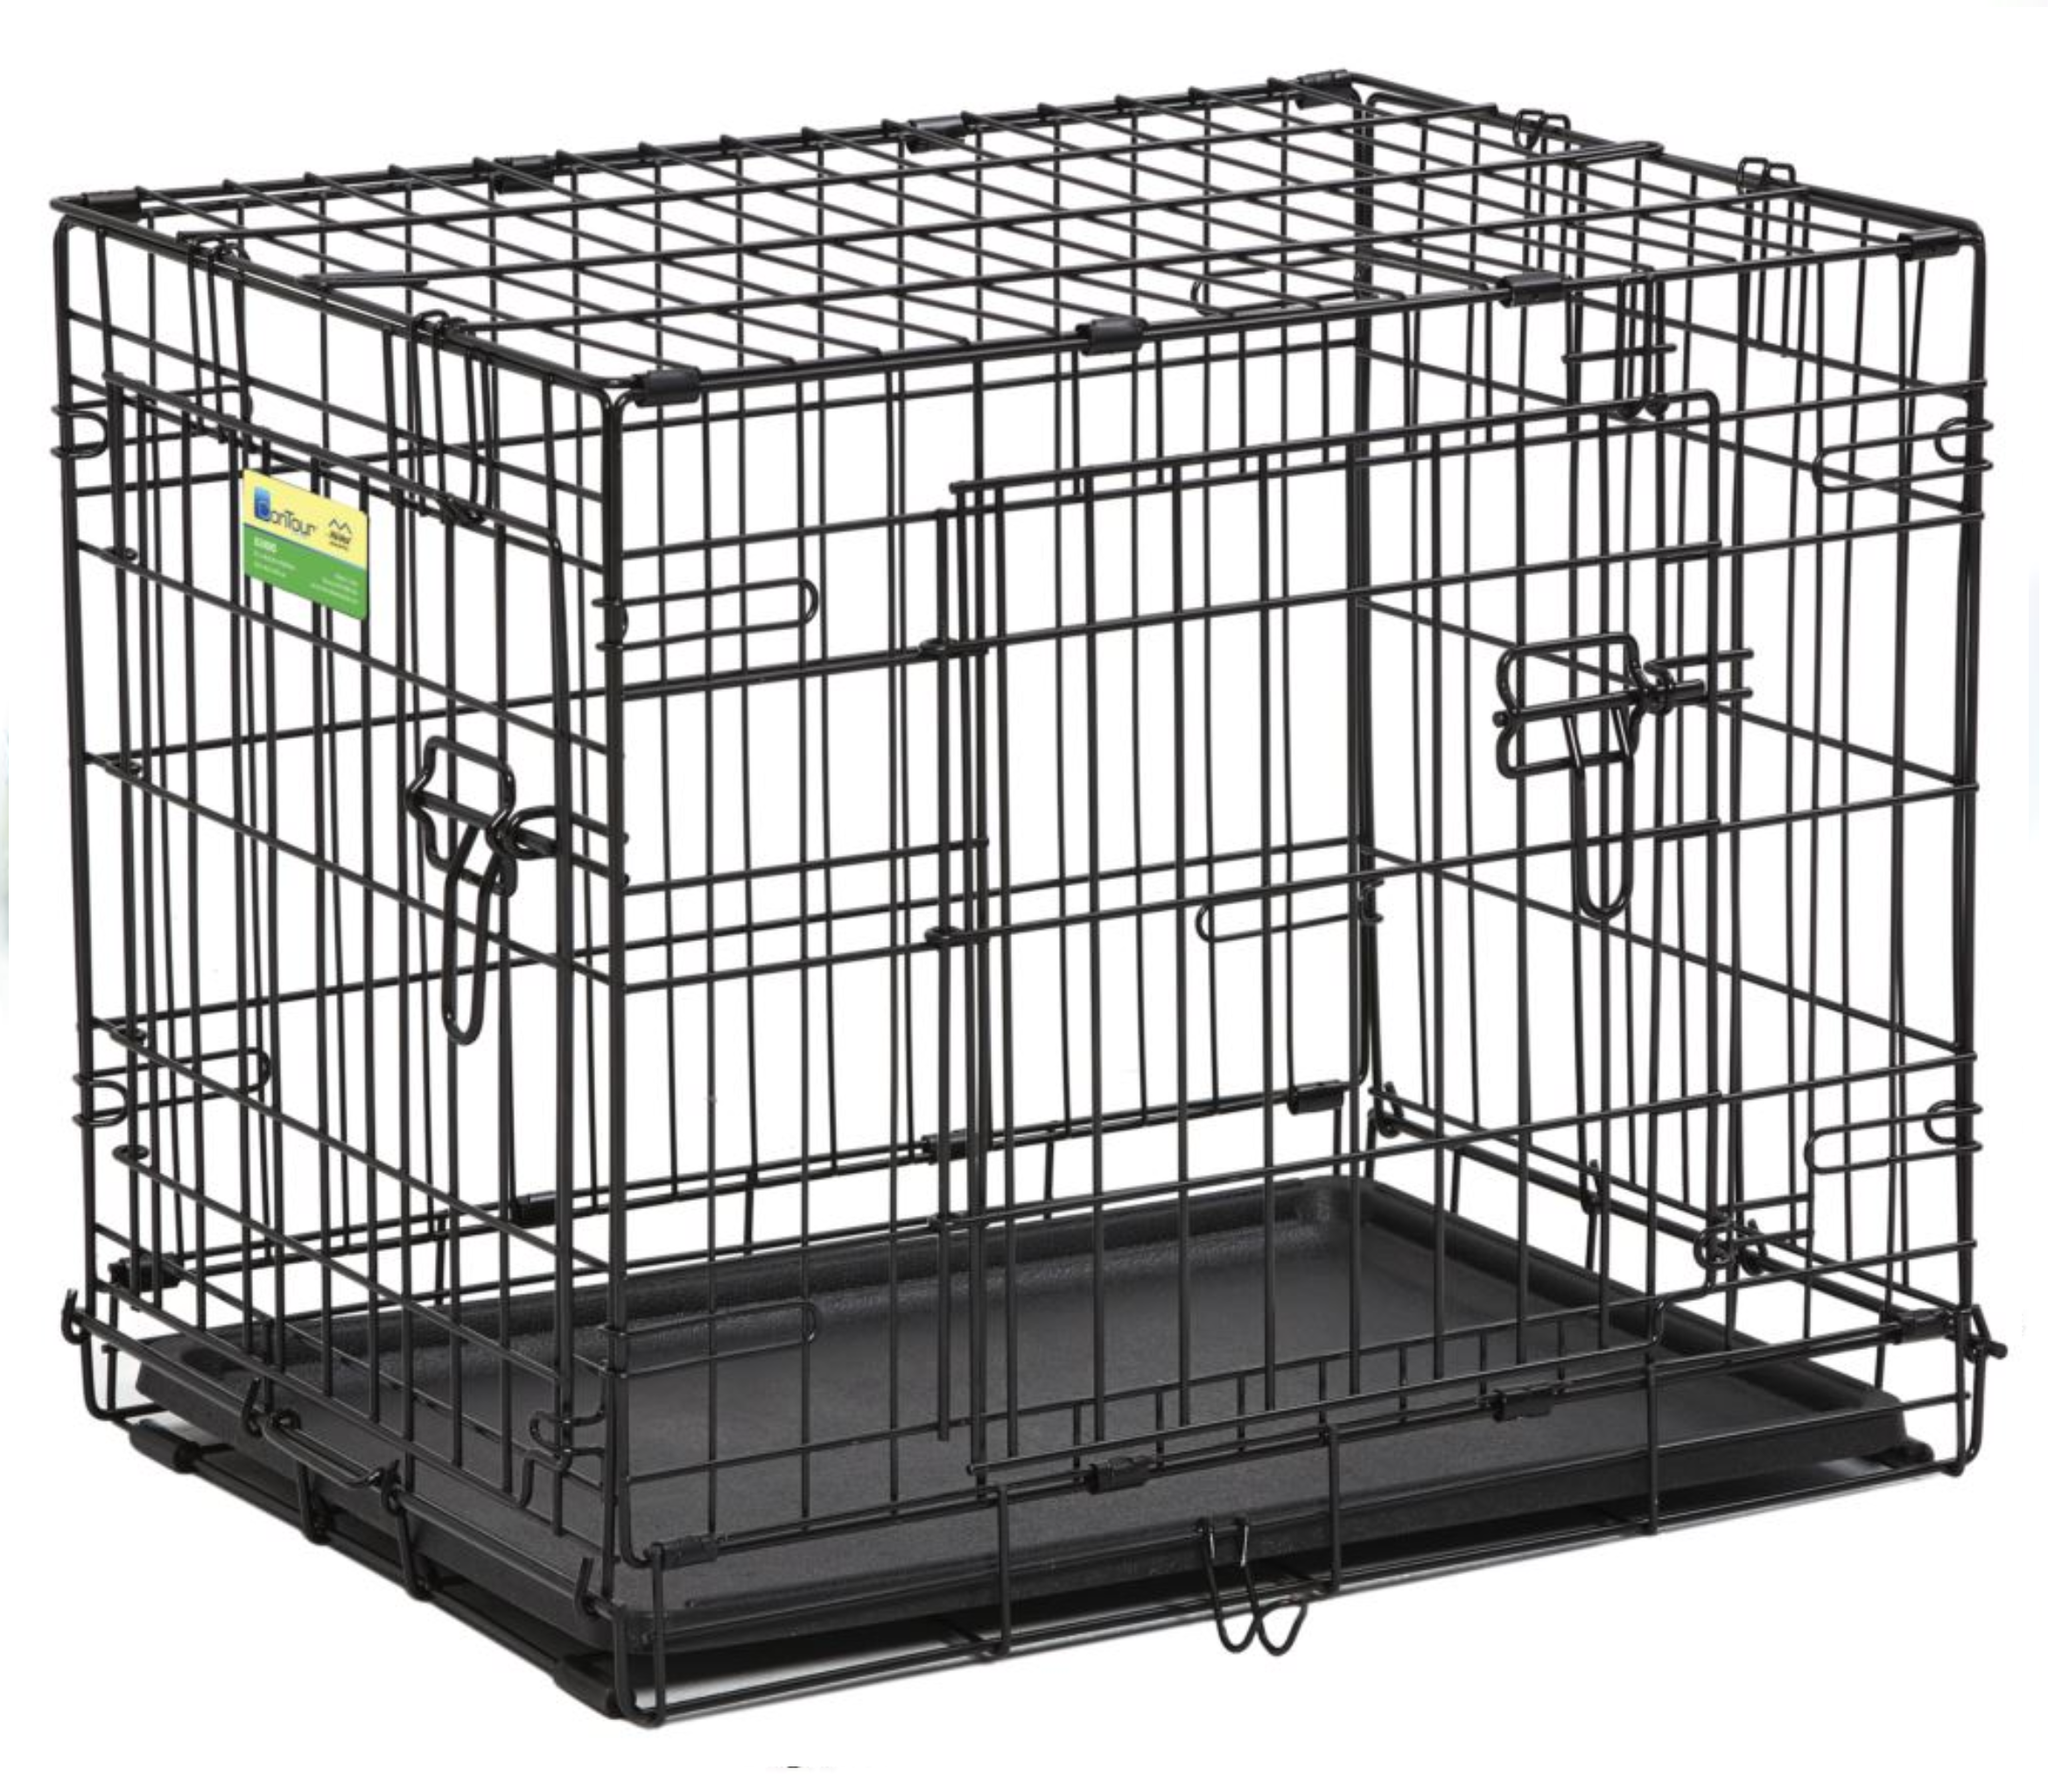 MIDWEST CONTAINER Midwest Contour 2 Door Crate 42x28x30